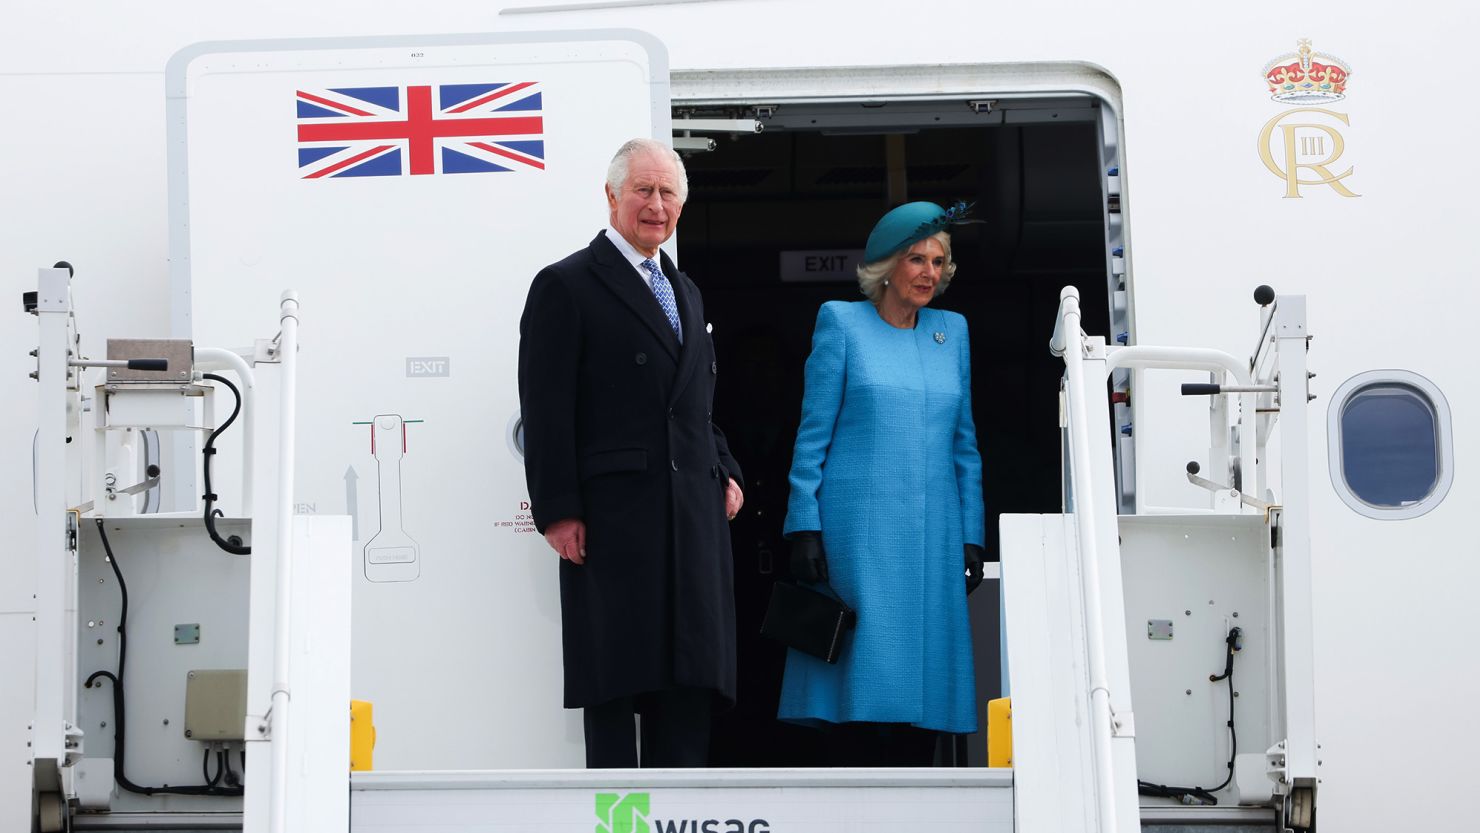 King Charles III and Camilla, Queen Consort arrive at Berlin Brandenburg Airport, Germany, on Wednesday.